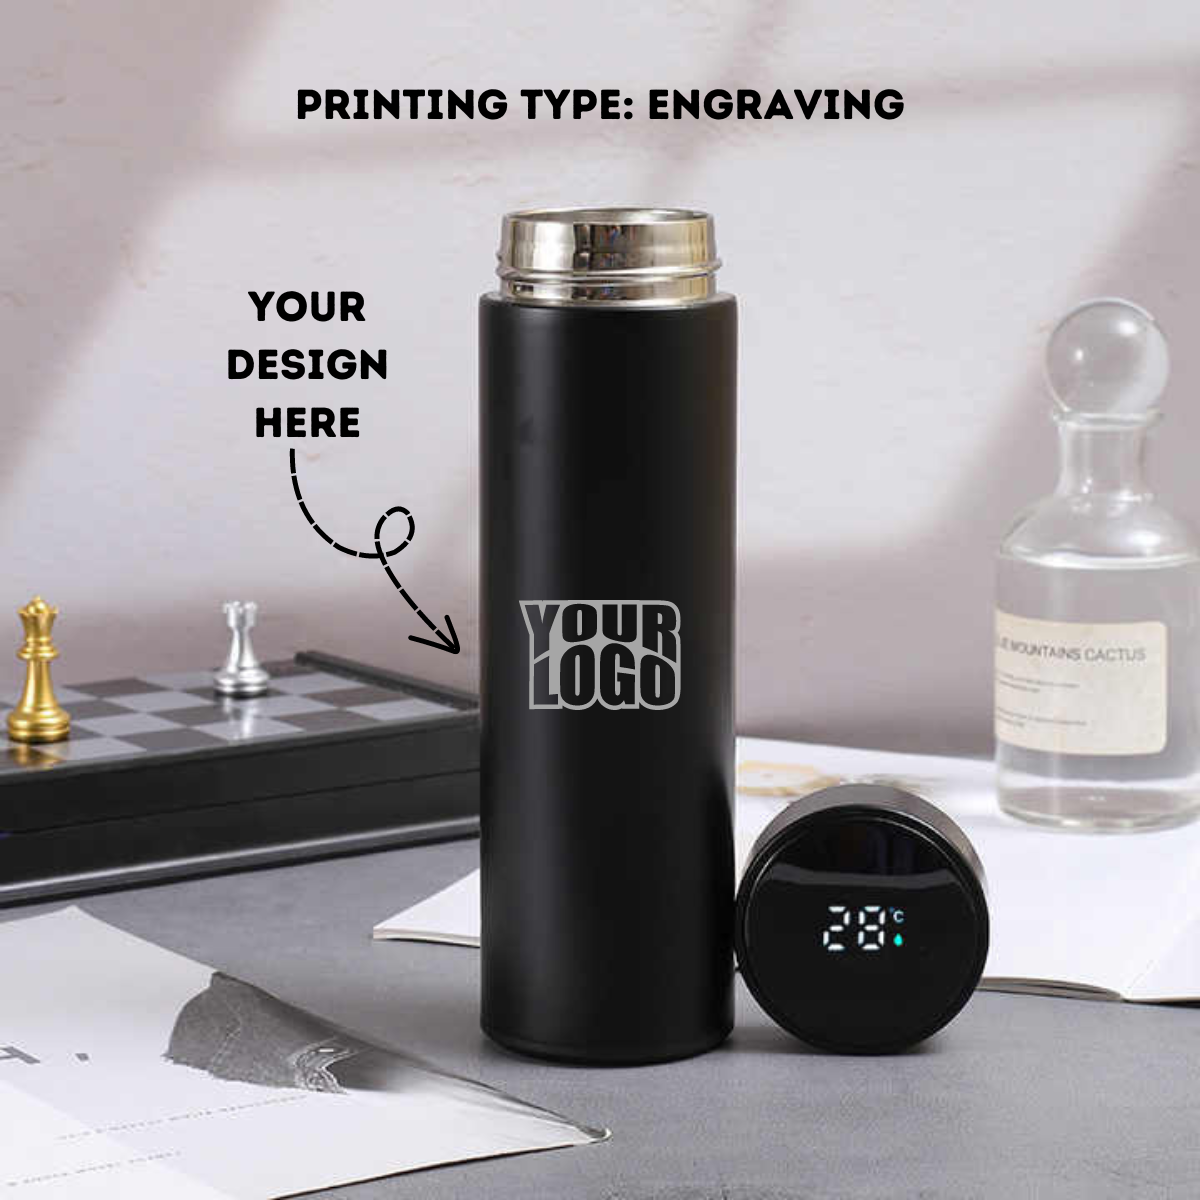 Personalized Black Temperature Water Bottle - Laser Engraved - For Return Gift, Corporate Gifting, Office or Personal Use